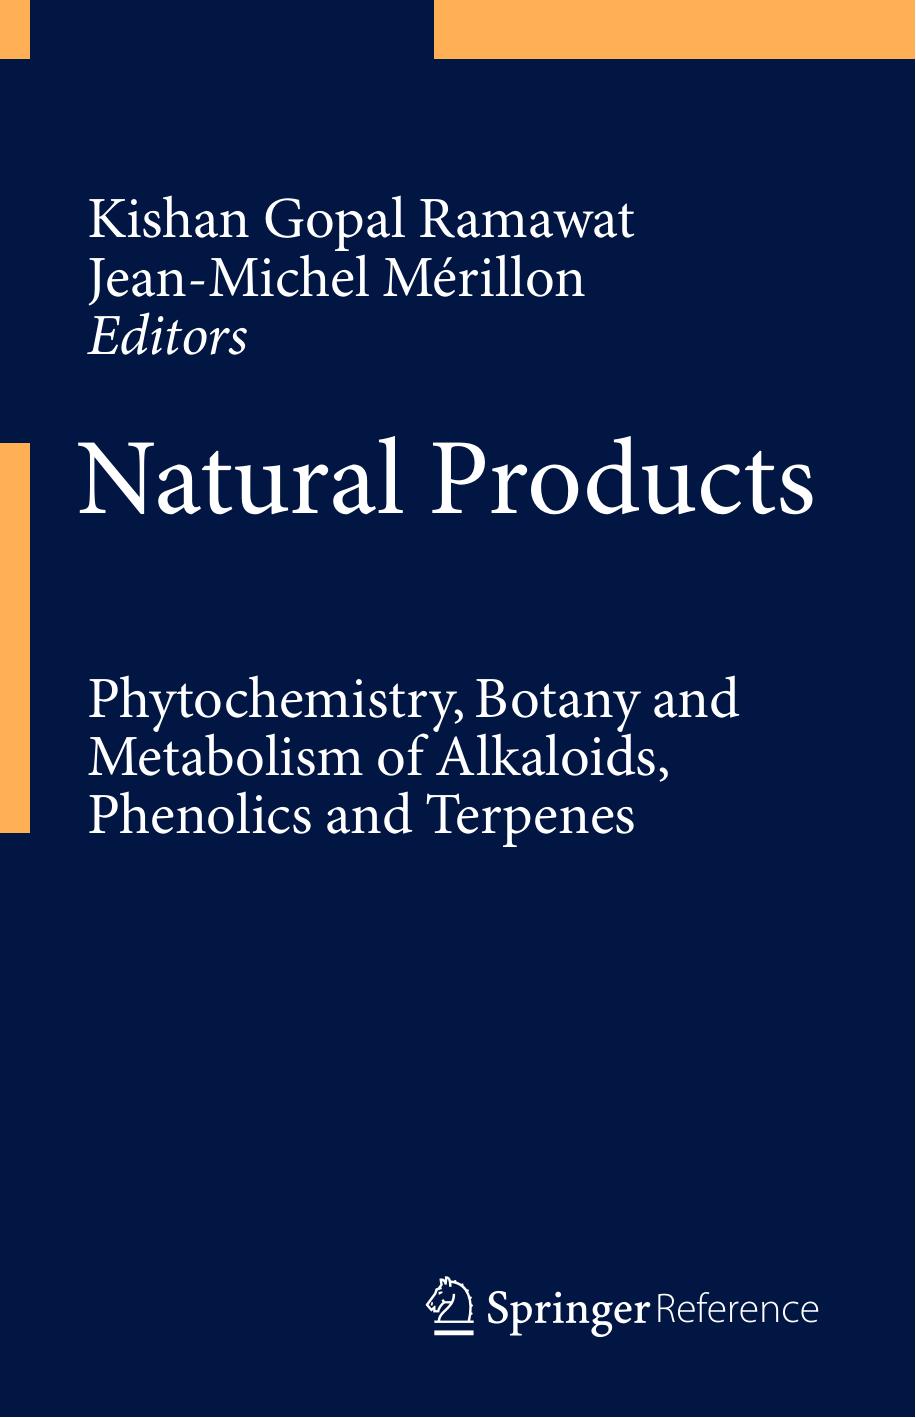 Natural Products Phytochemistry, Botany and Metabolism of Alkaloids, Phenolics and Terpenes